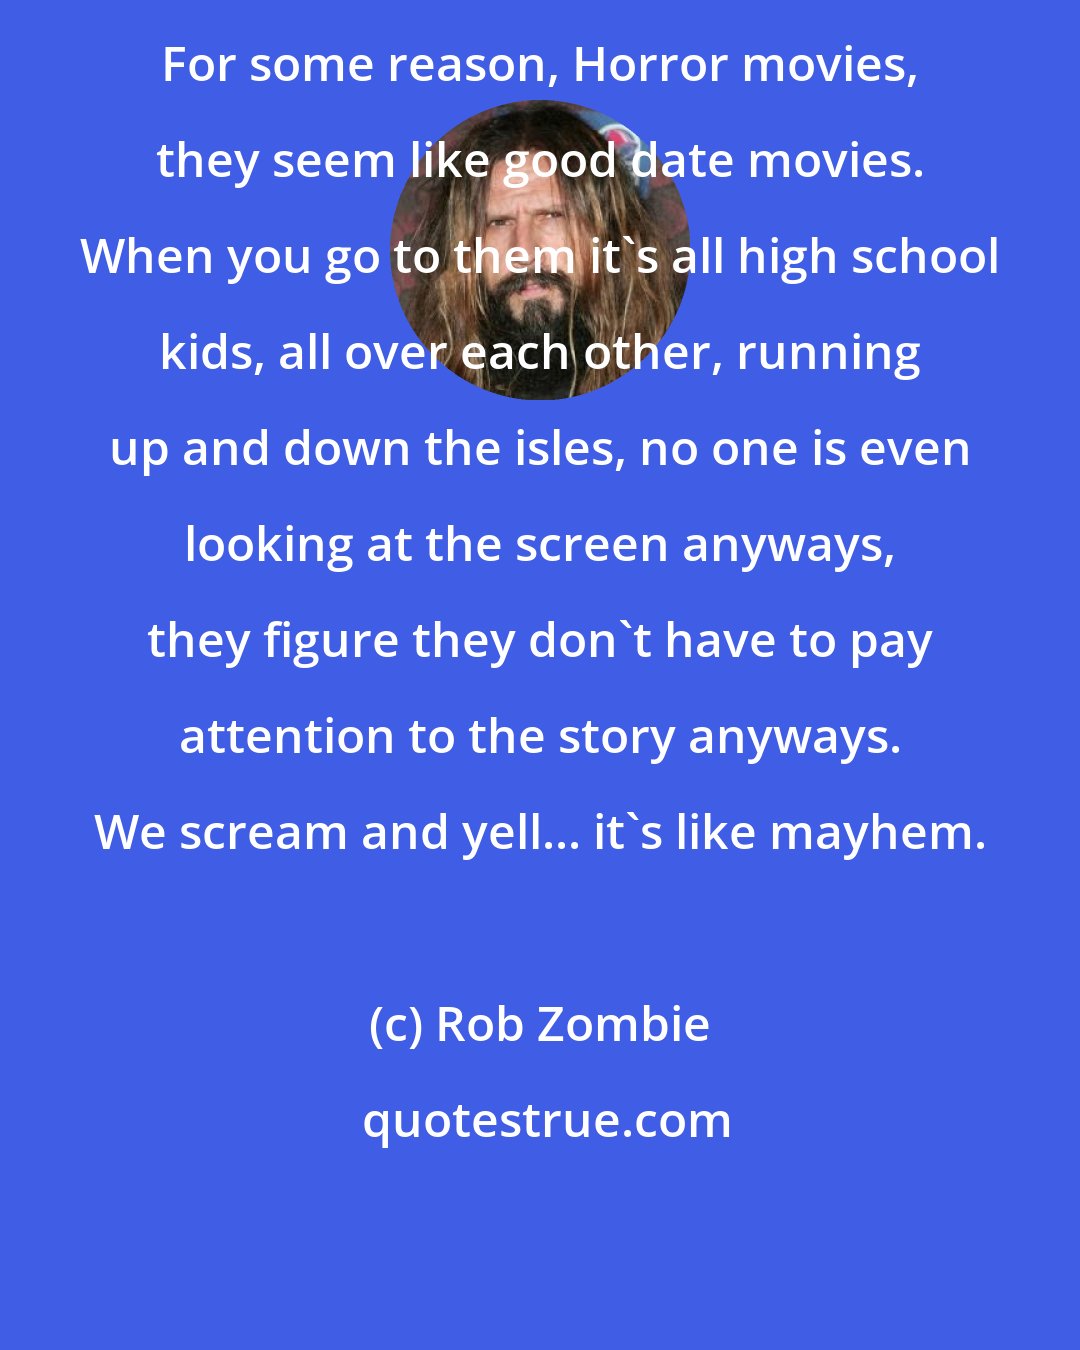 Rob Zombie: For some reason, Horror movies, they seem like good date movies. When you go to them it's all high school kids, all over each other, running up and down the isles, no one is even looking at the screen anyways, they figure they don't have to pay attention to the story anyways. We scream and yell... it's like mayhem.